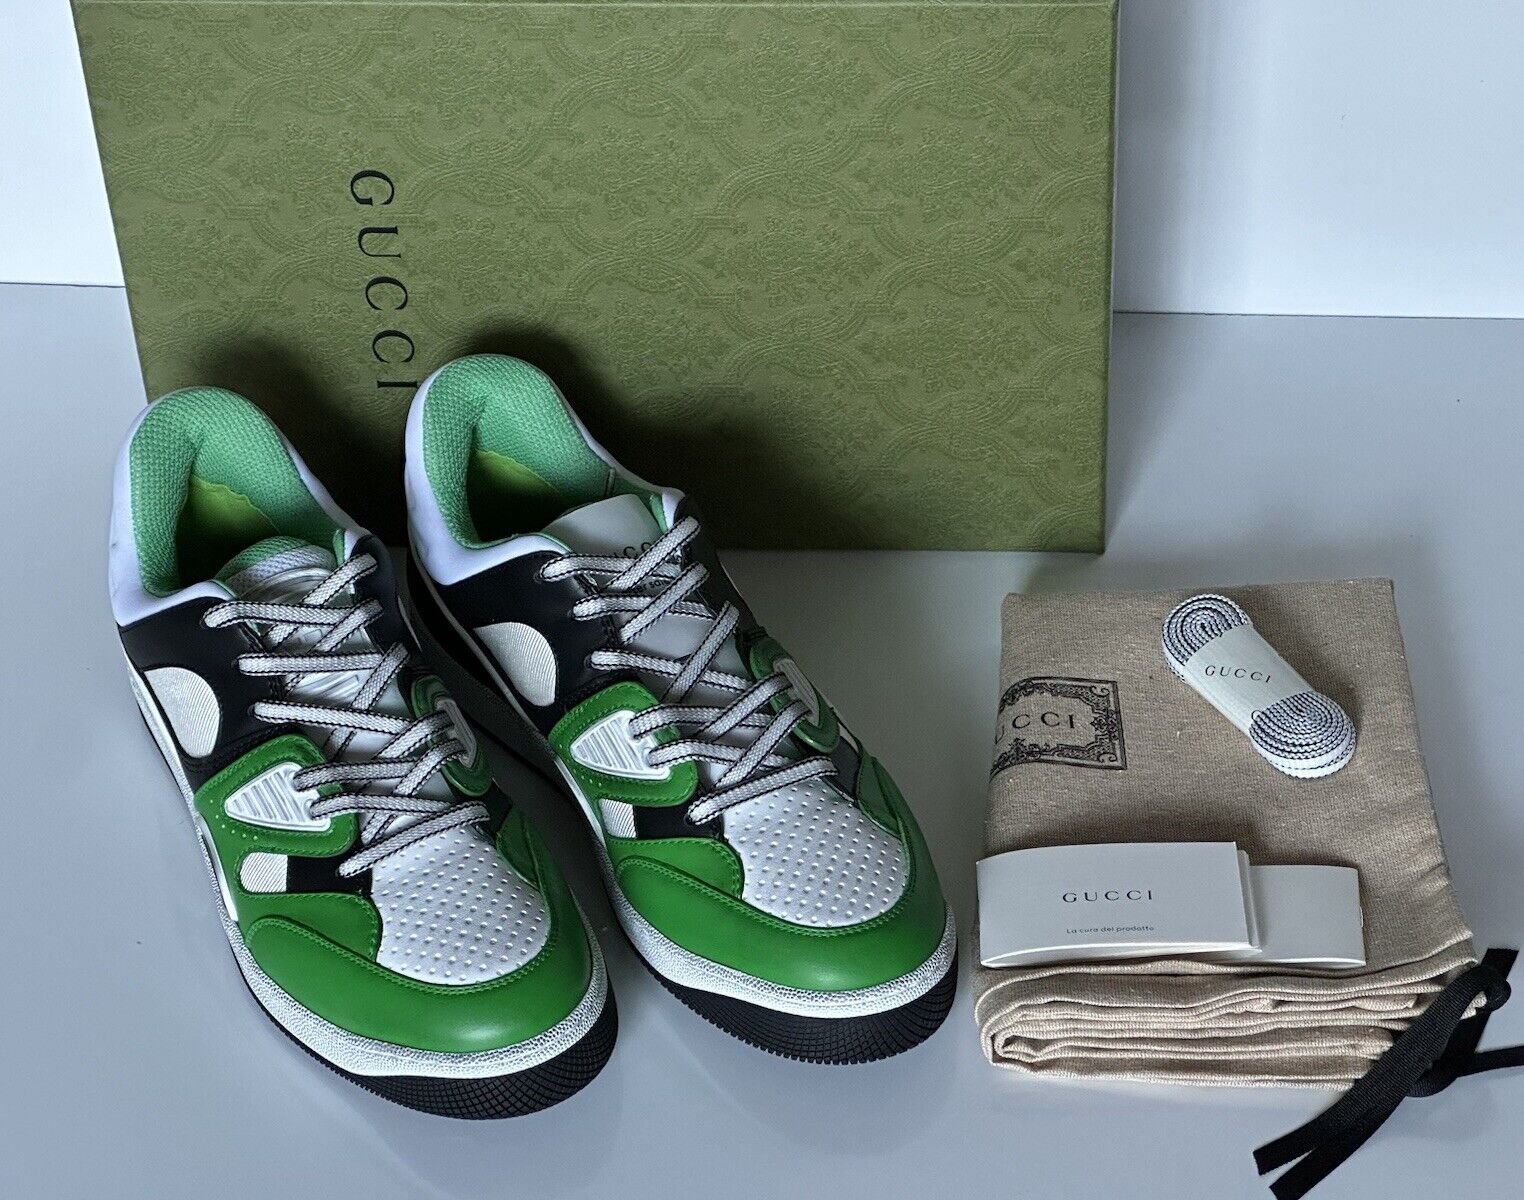 NIB Gucci Men's Low-top White/Green Leather Sneakers 9.5 US (Gucci 9G) 697882